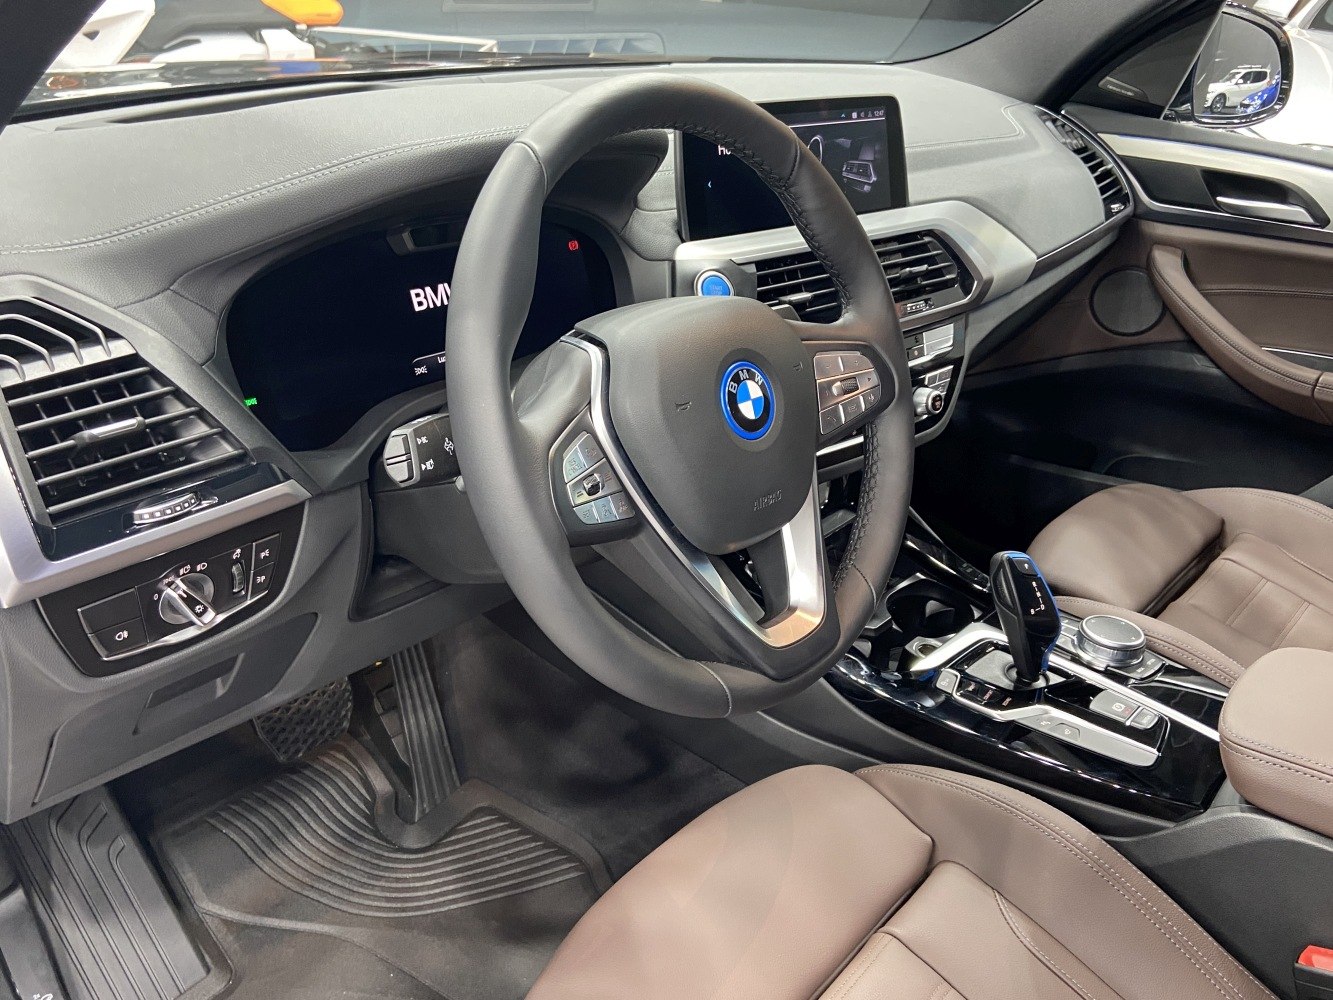 https://totalrenting.es/wp-content/uploads/2022/10/bmw-ix3-g08-2021-80-kwh-286-cv-suv-3.png